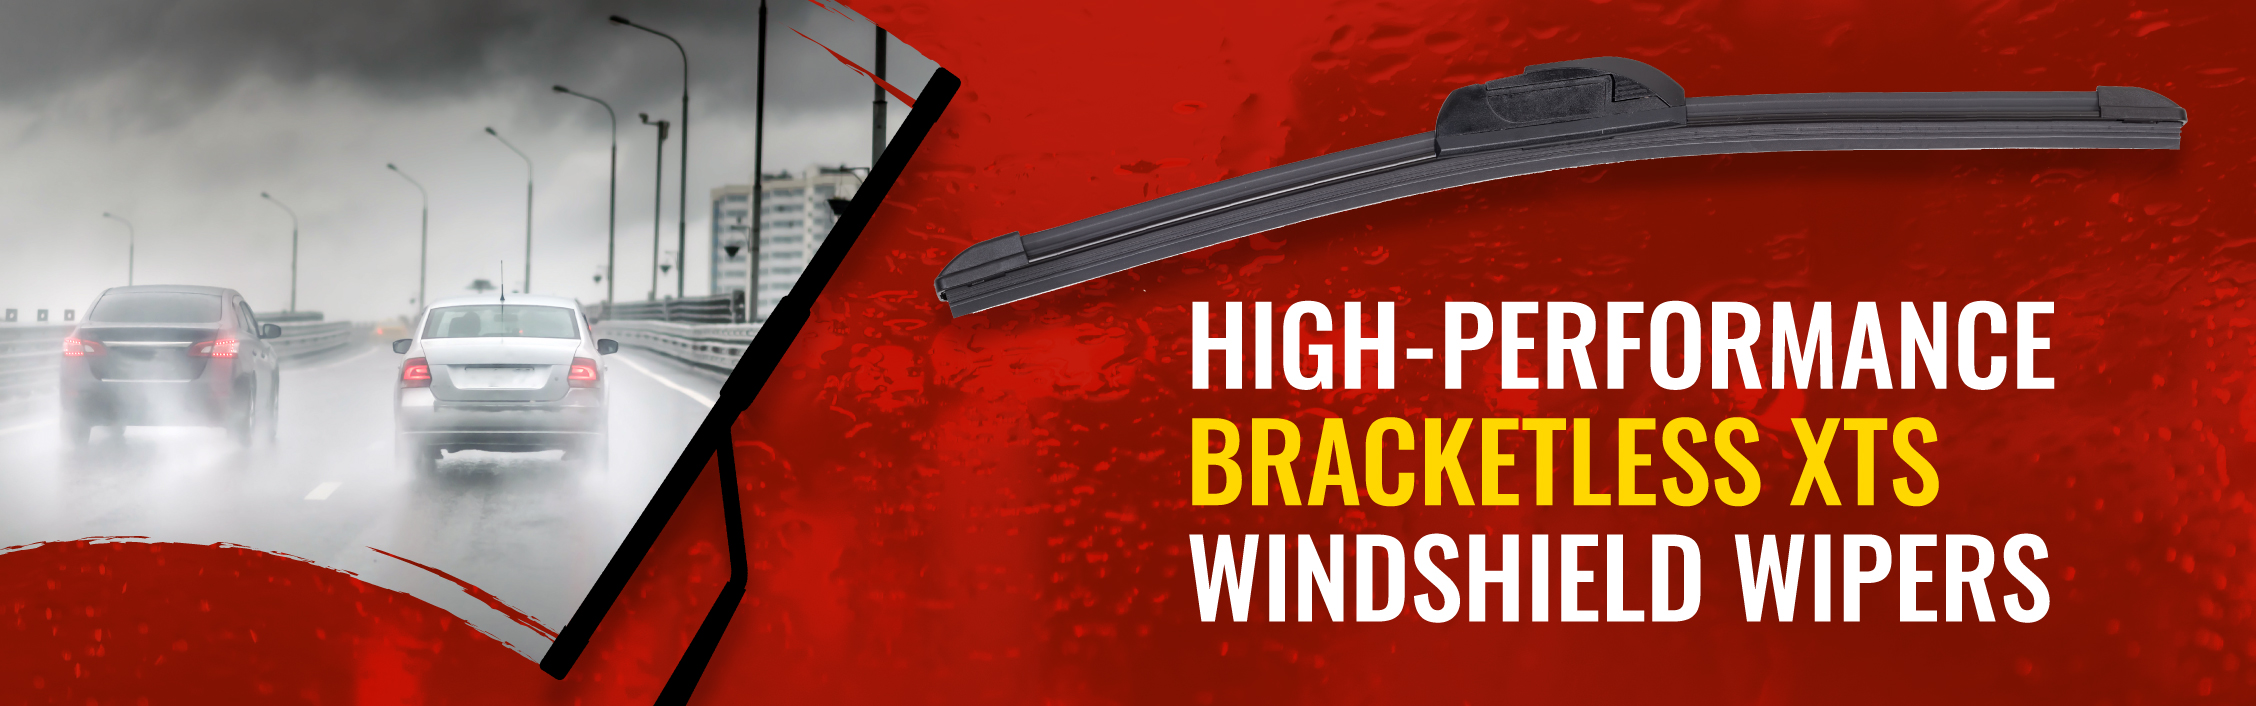 high-performance Sixity XTS windshield wipers